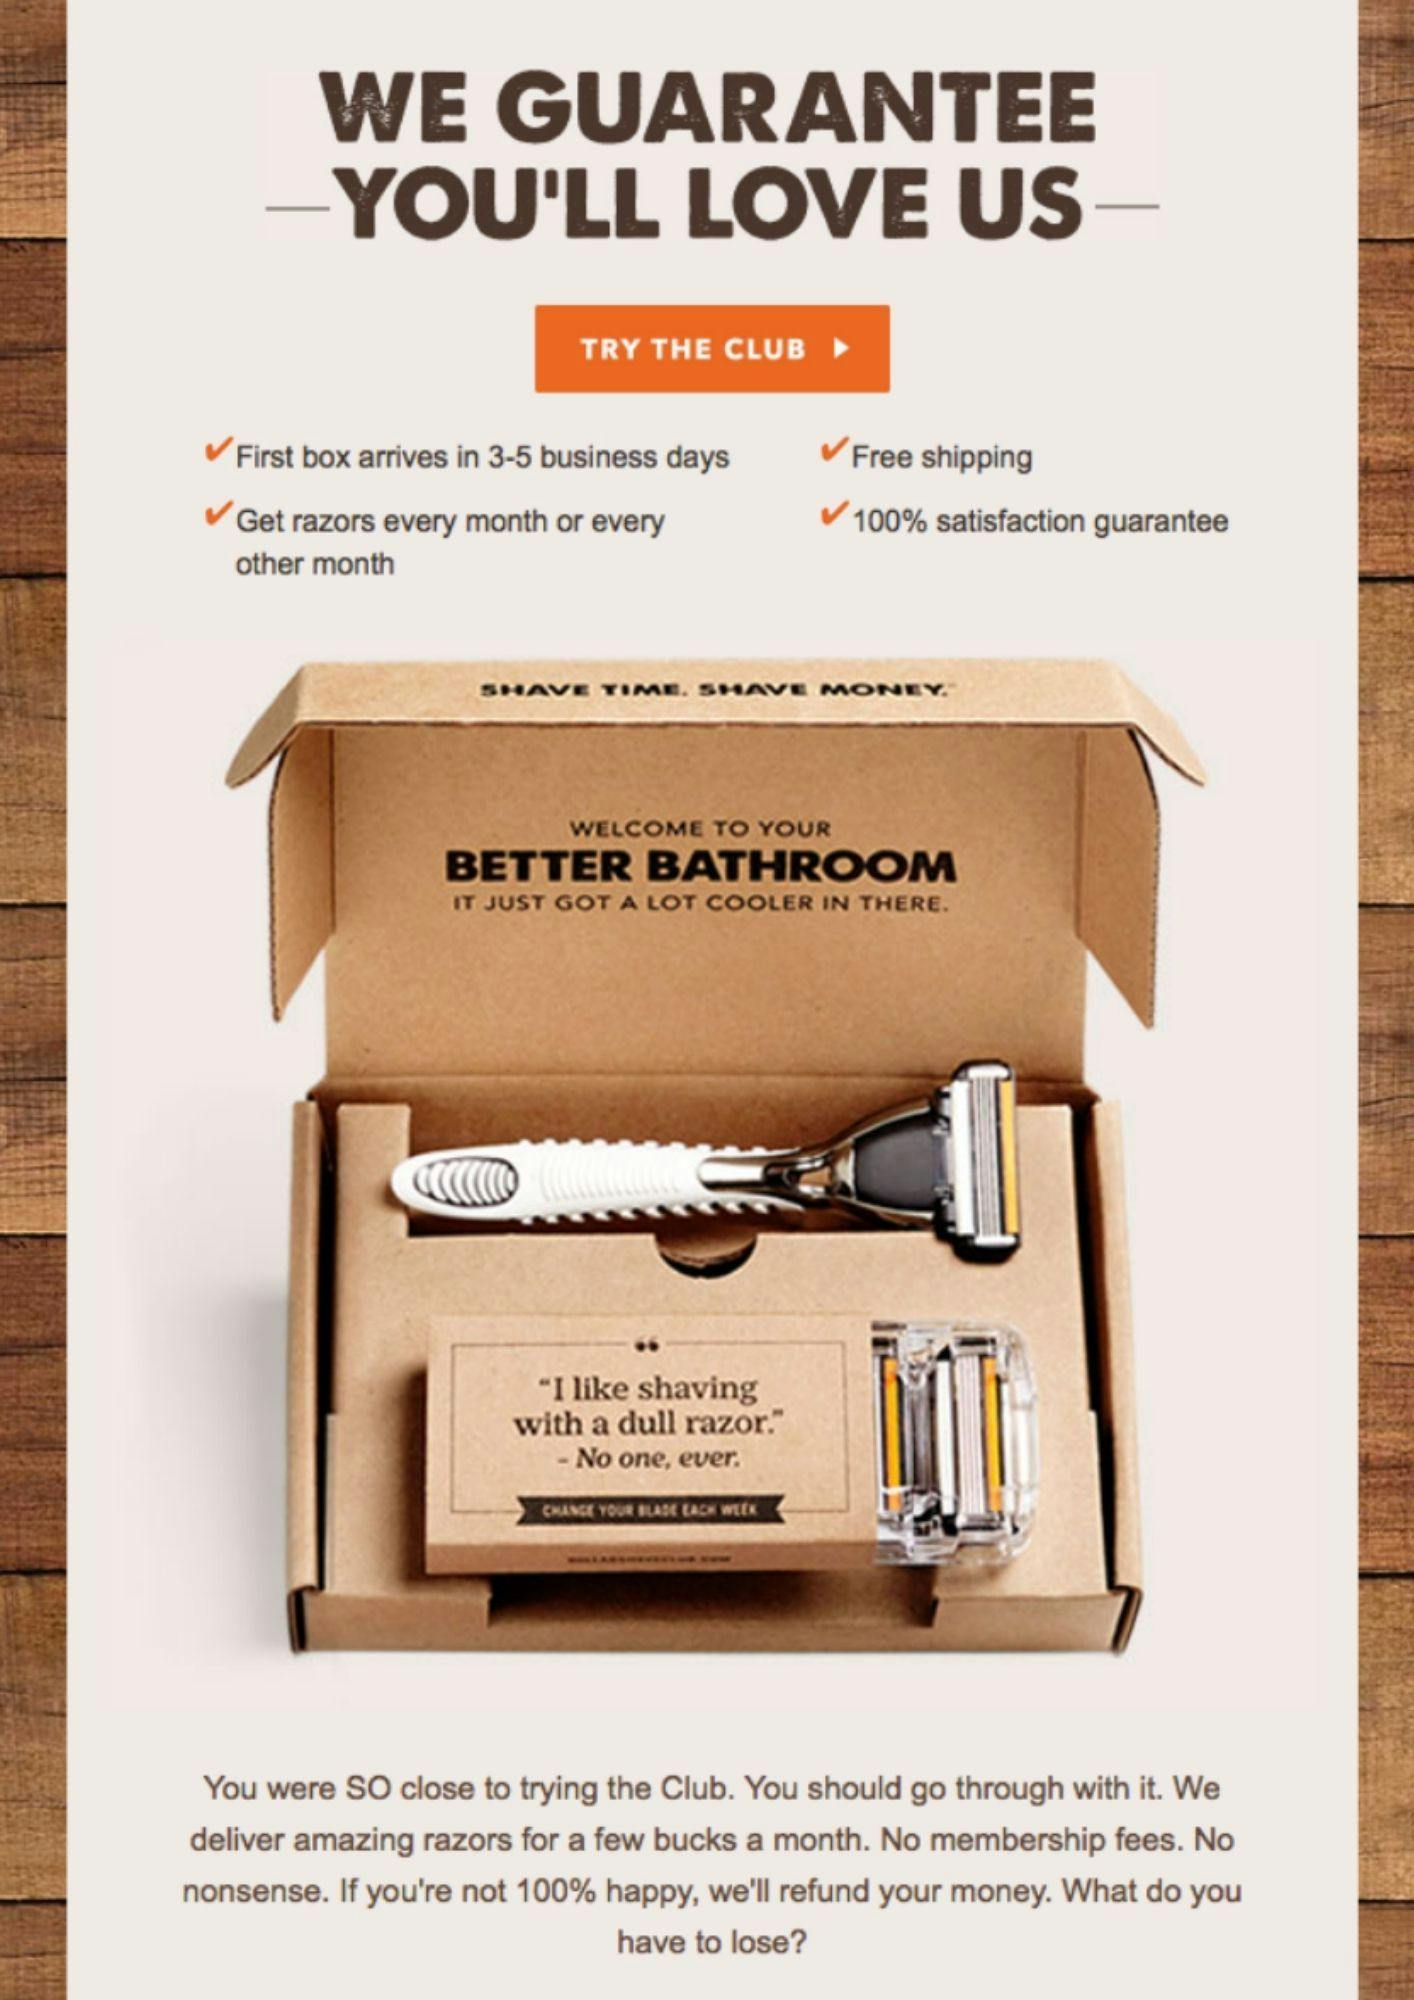 Trust building email by Dollar Shave Club